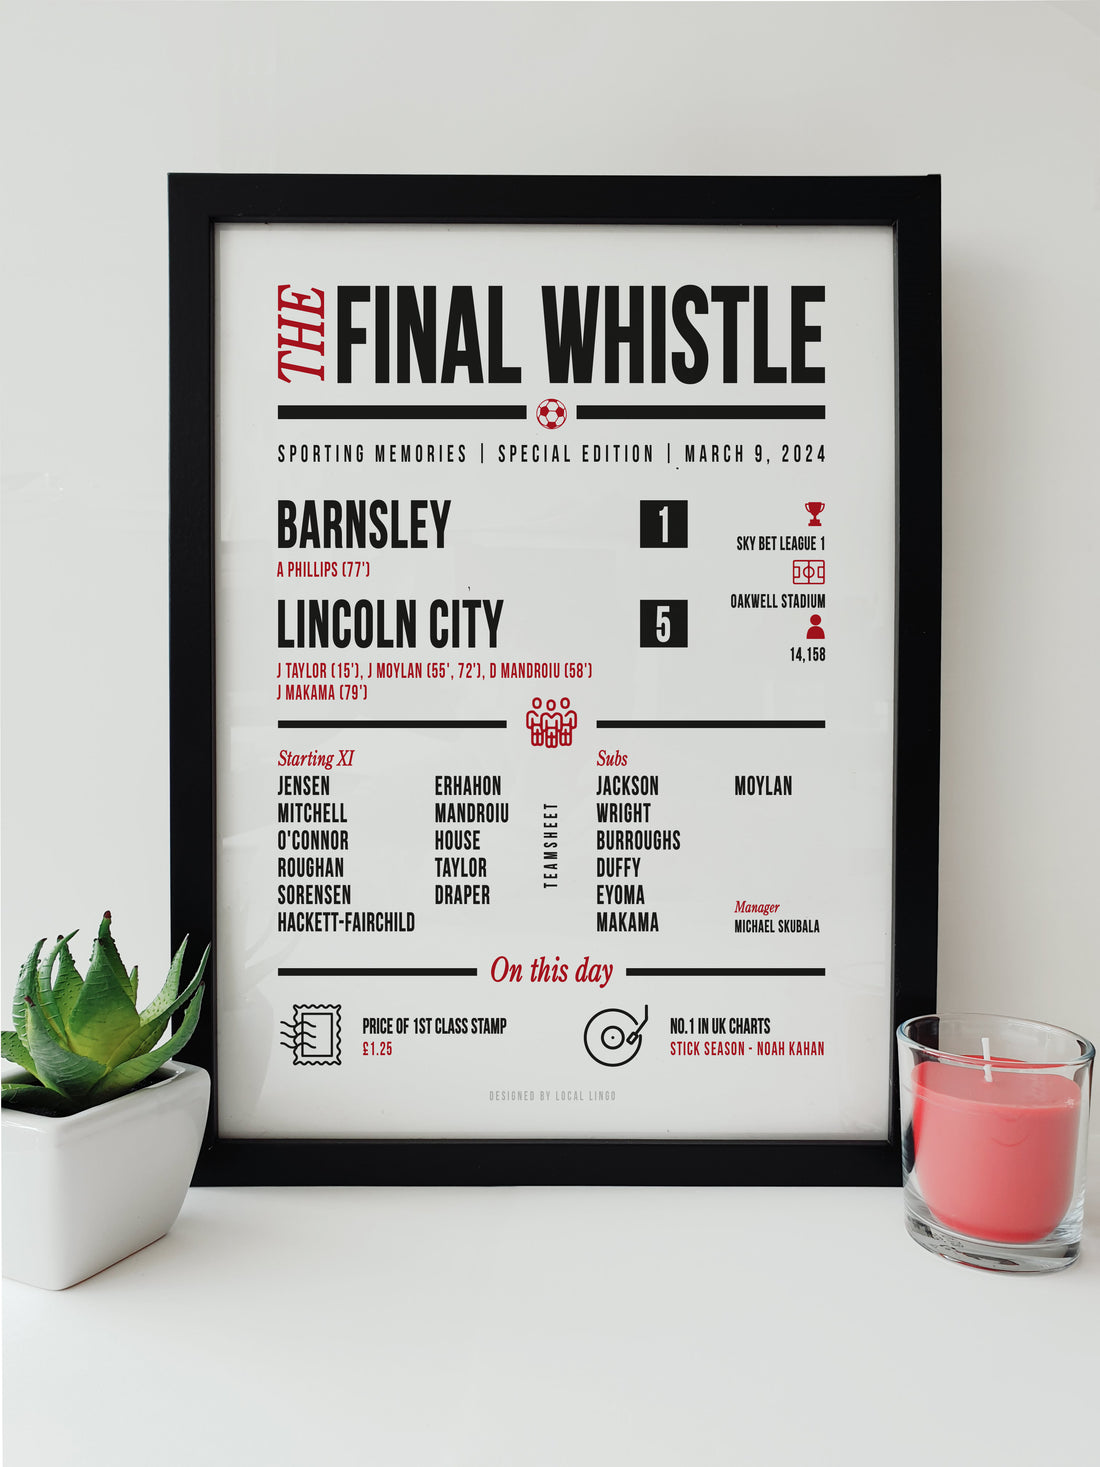 Lincoln City vs Barnsley 2024 The Final Whistle Keepsake Print by Local Lingo, featuring detailed match information in black and red text on a white background in a black frame.